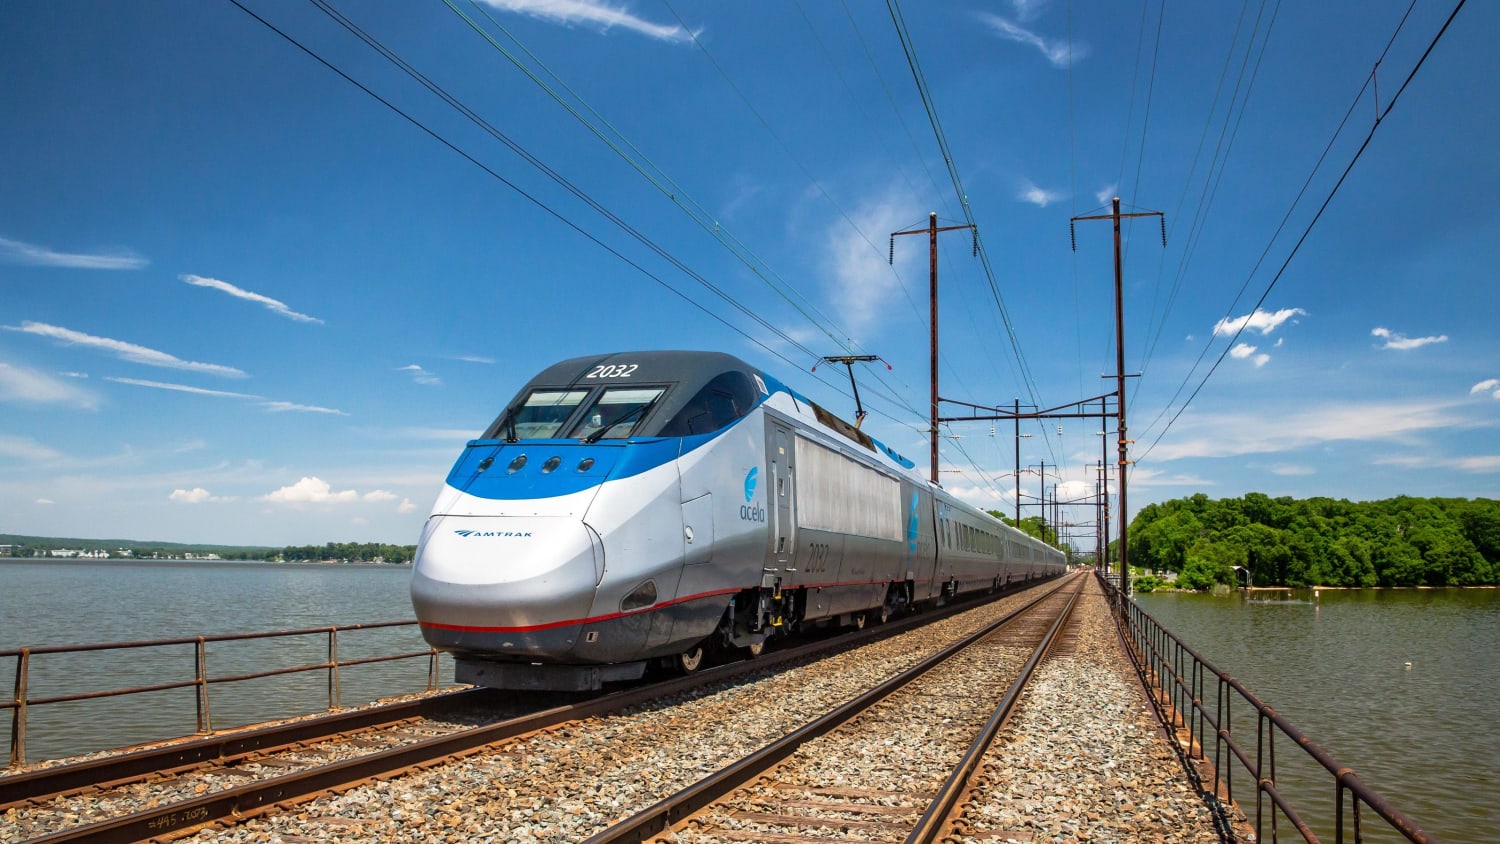 What Amtrak passengers need to know as train service comes back from coronavirus pandemic